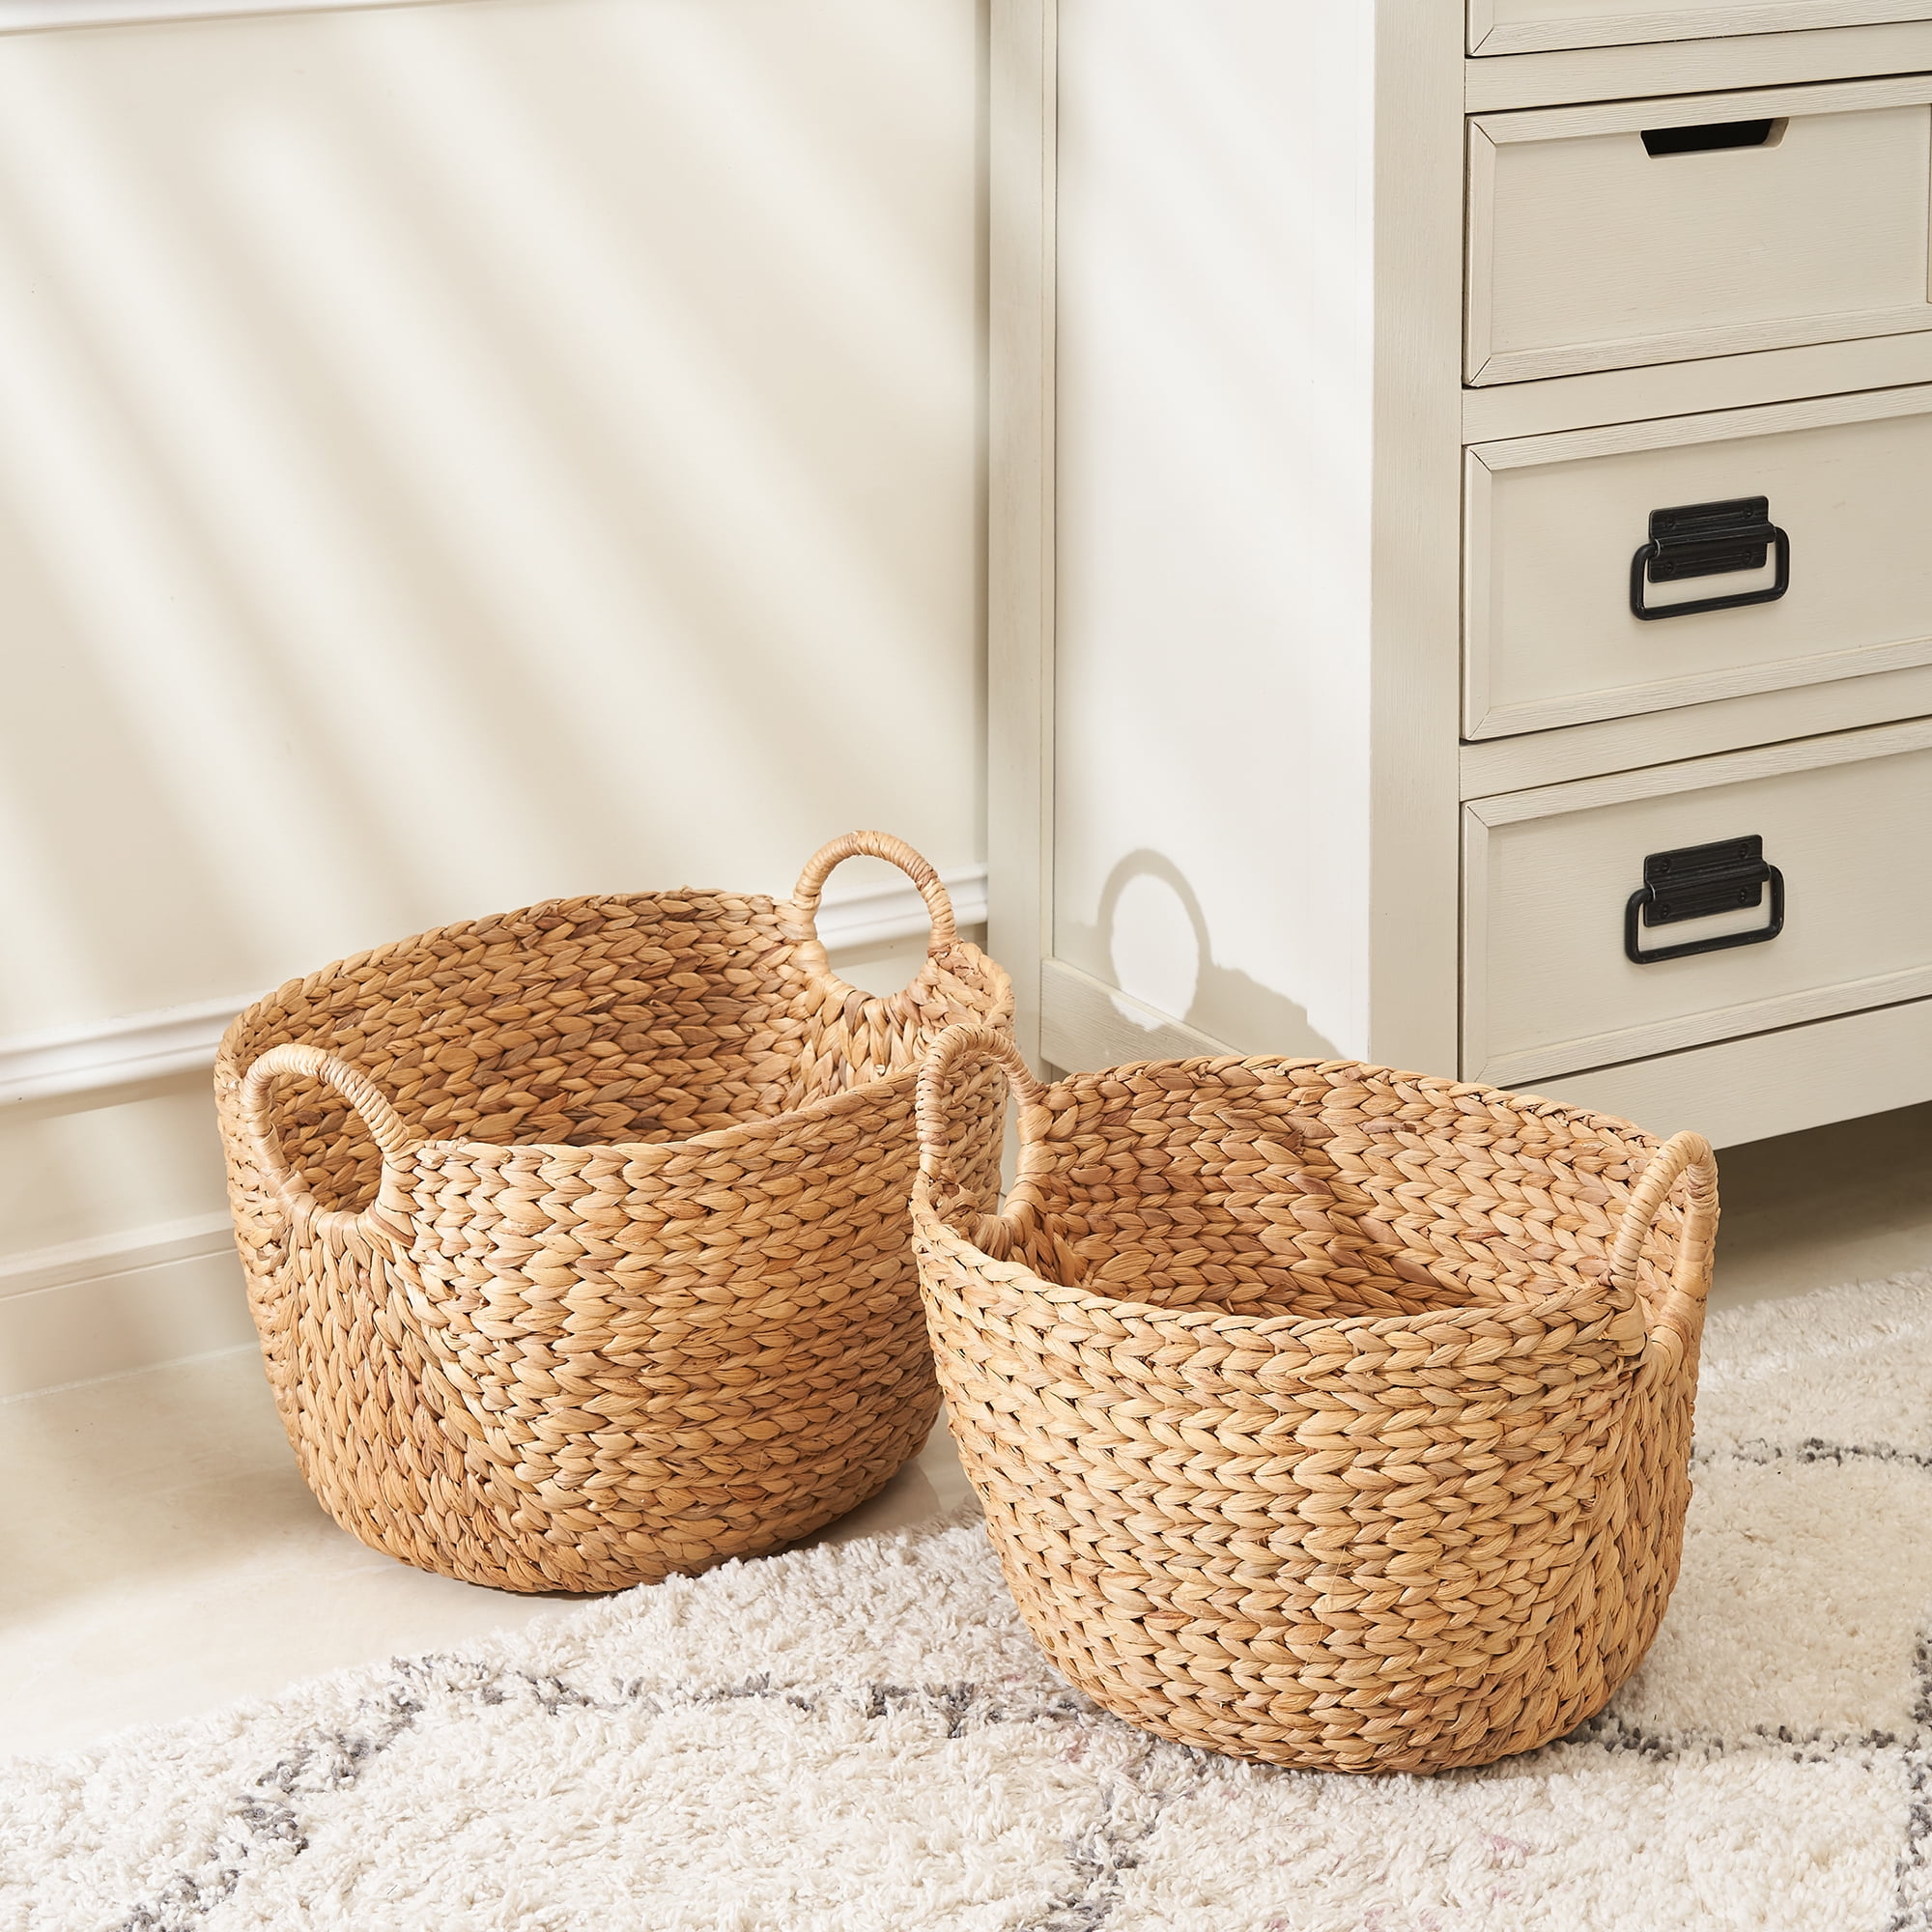 Aaliyah 2-piece Assorted Unframed Catchall Hand-woven Water Hyacinth Storage Basket Set with Handles